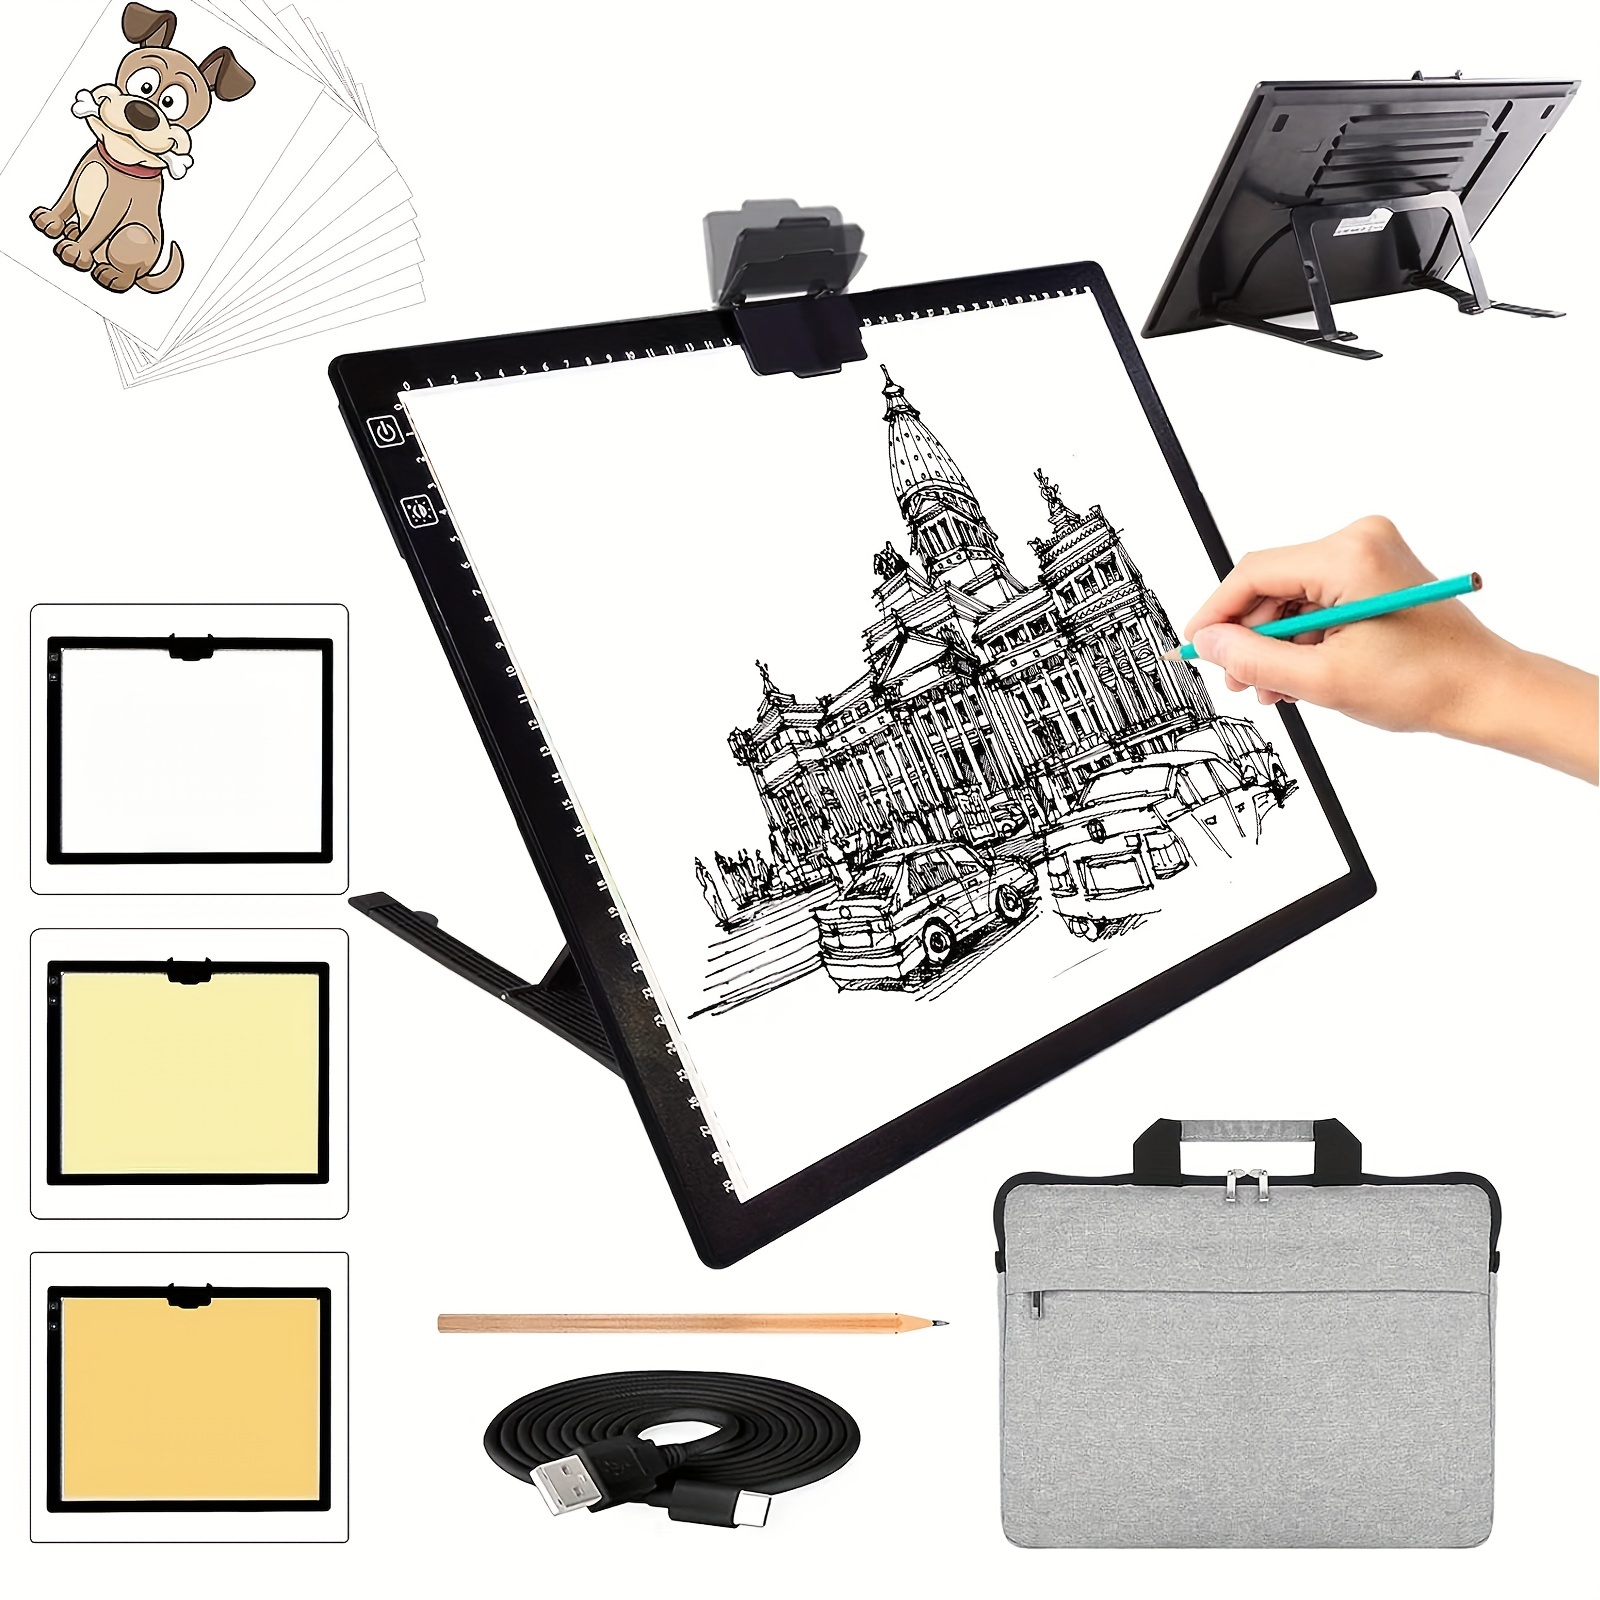 Rechargeable Tracing Light Box, Light Pad for Diamond Painting